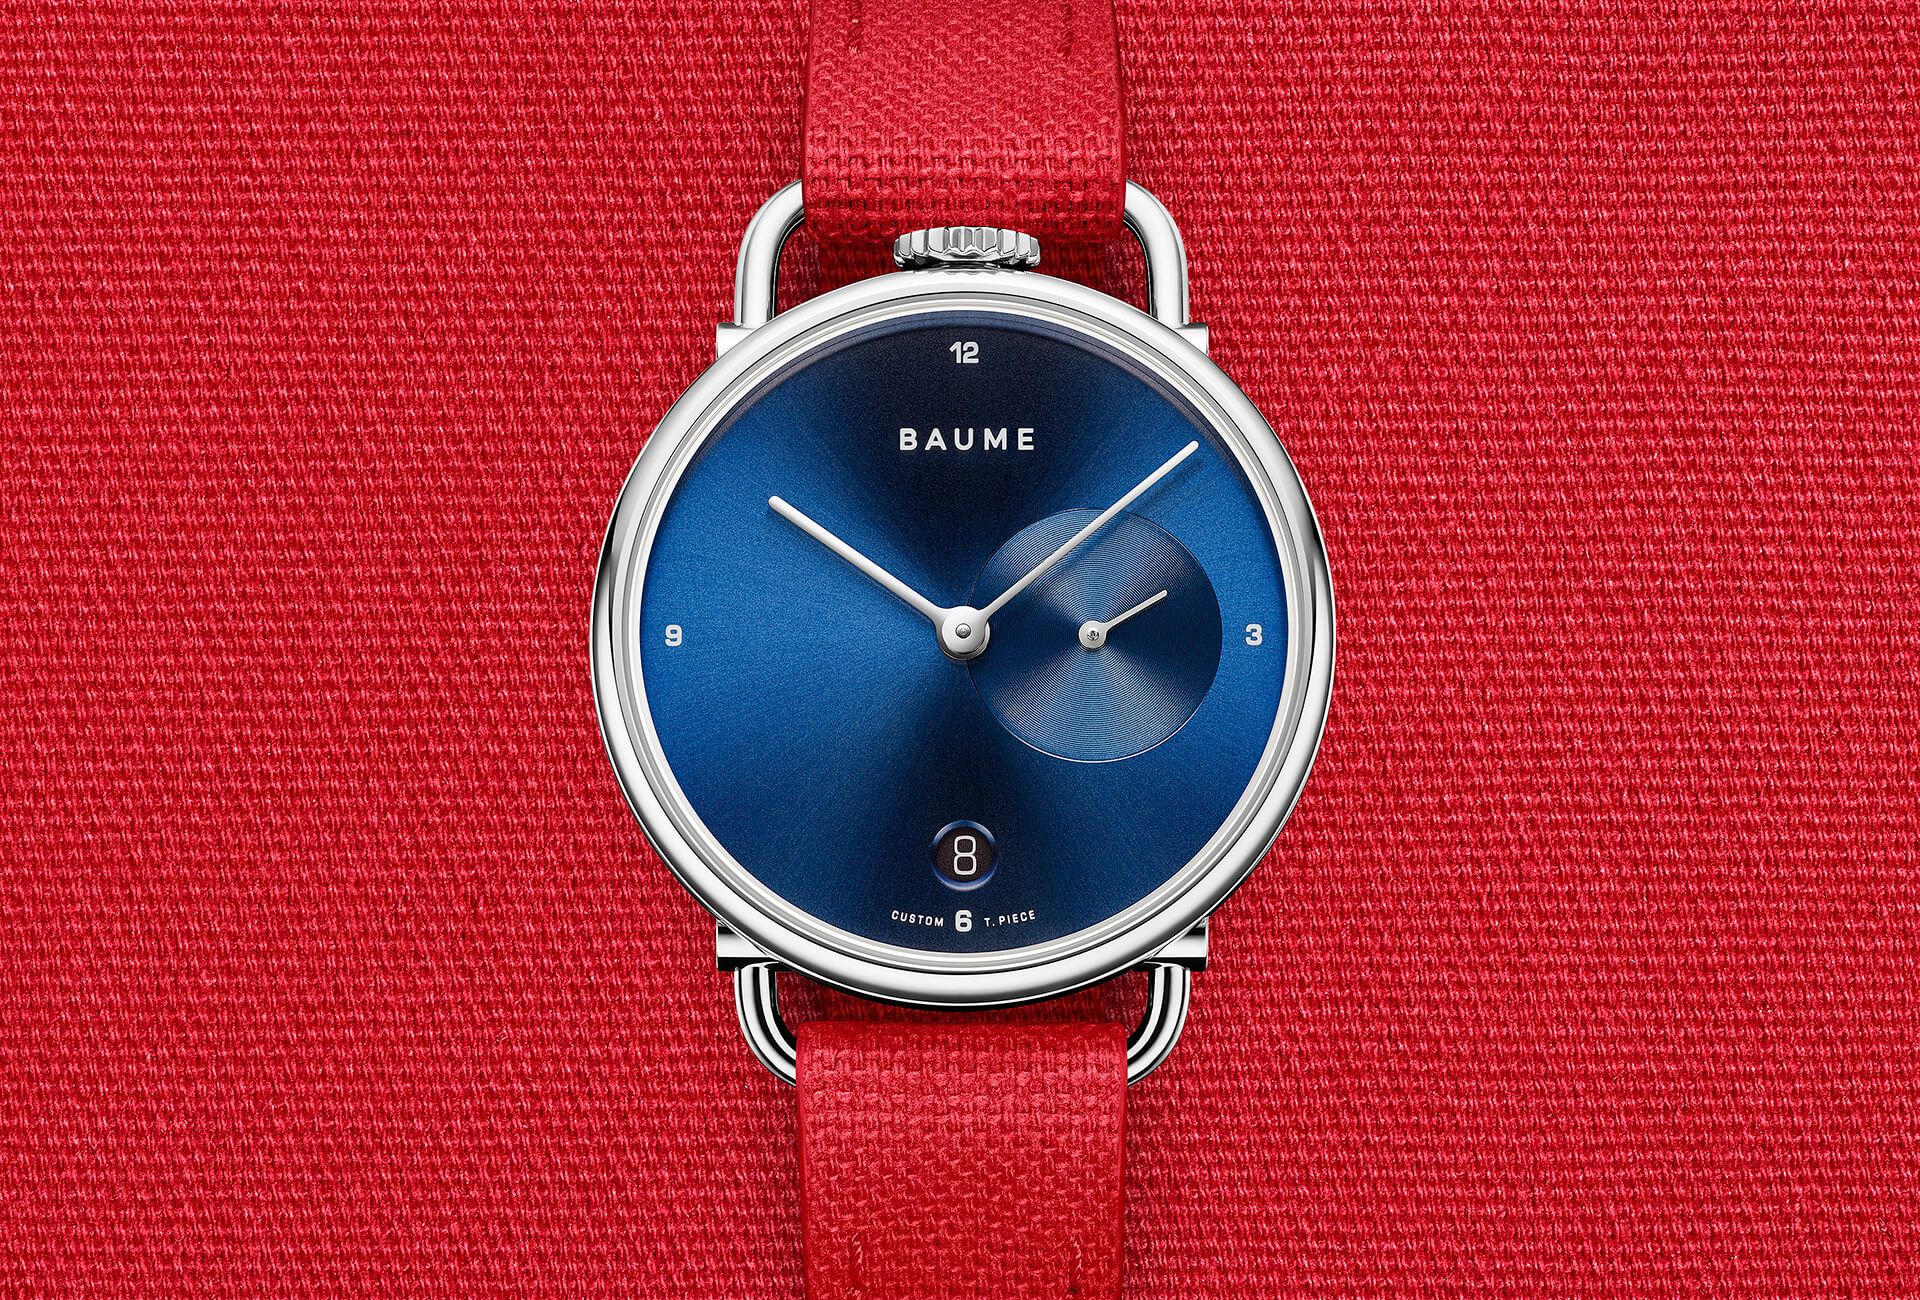 Custom Timepiece Red Cotton Material © Baume